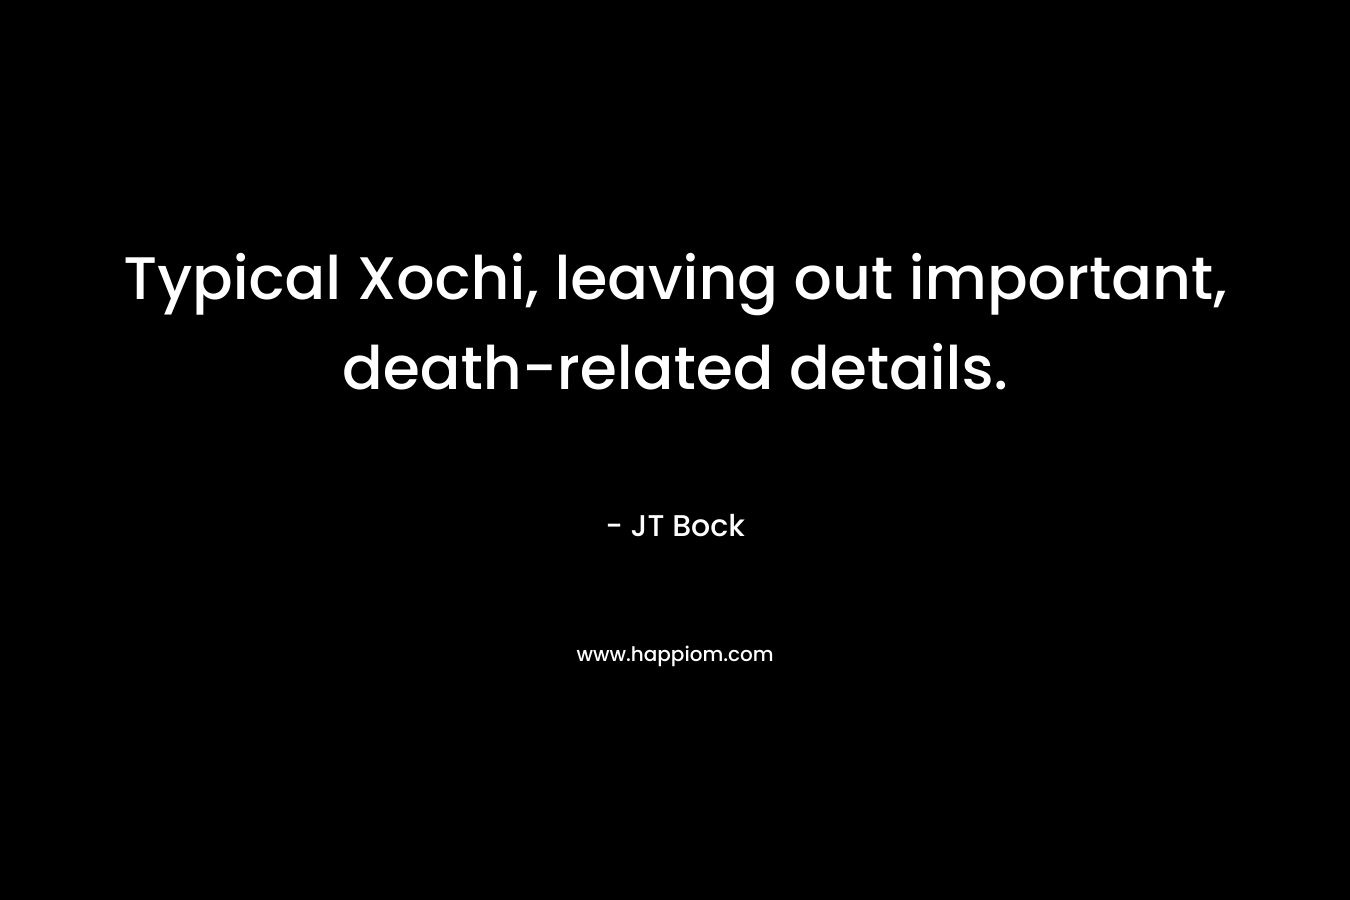 Typical Xochi, leaving out important, death-related details. – JT Bock